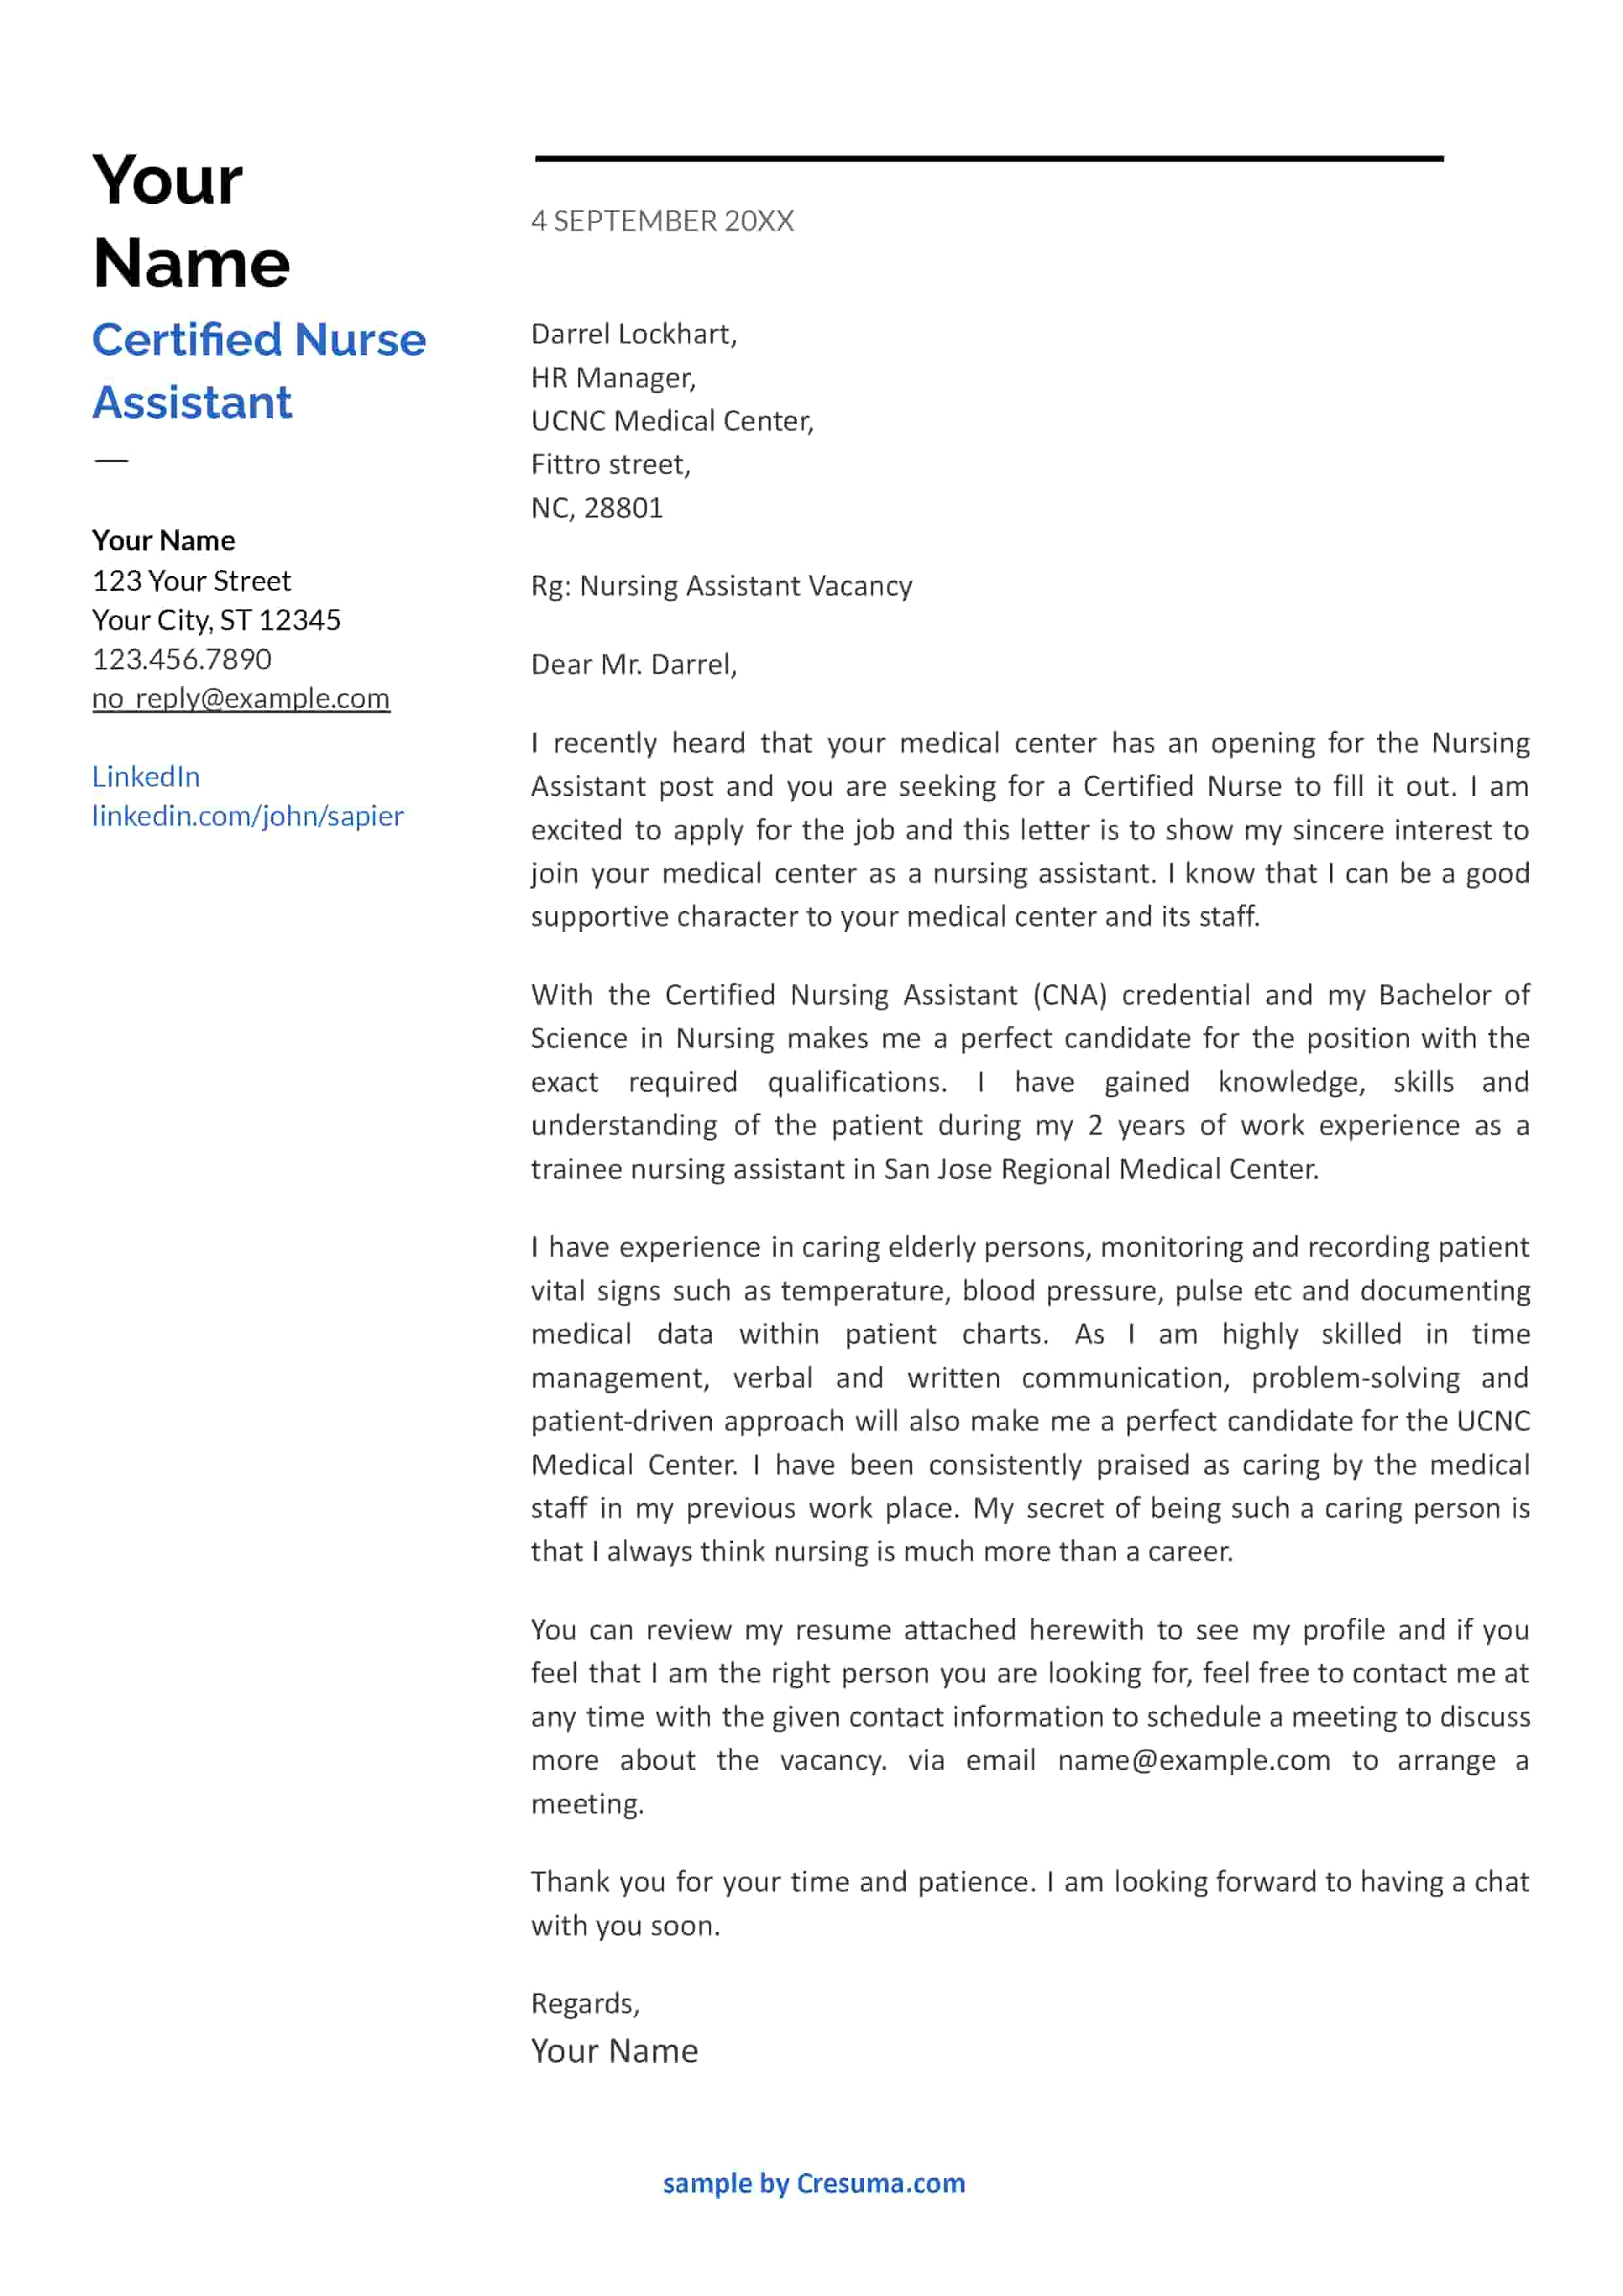 Certified Nursing Assistant Cover Letter example template 5